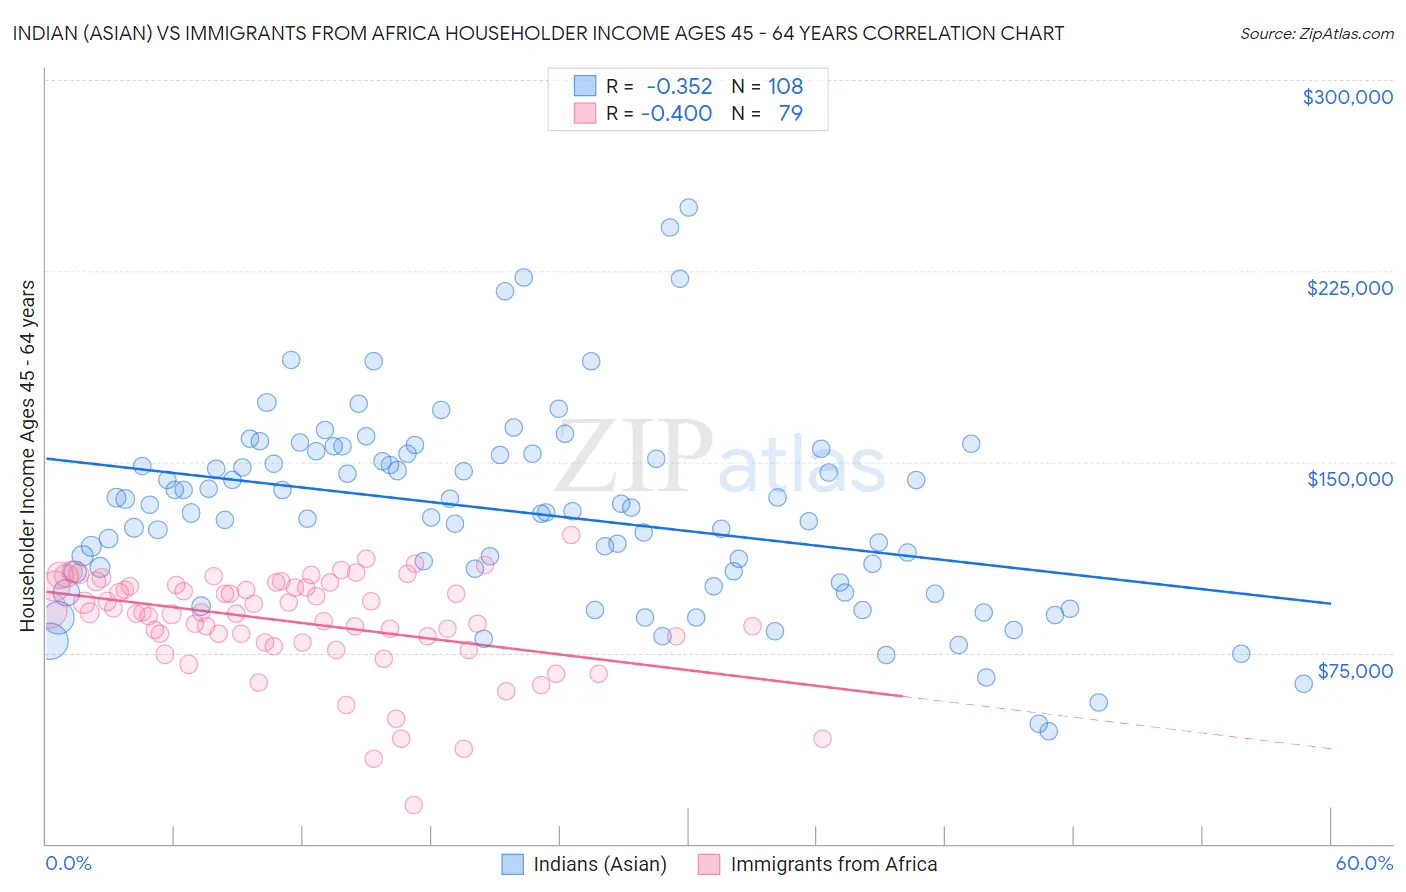 Indian (Asian) vs Immigrants from Africa Householder Income Ages 45 - 64 years